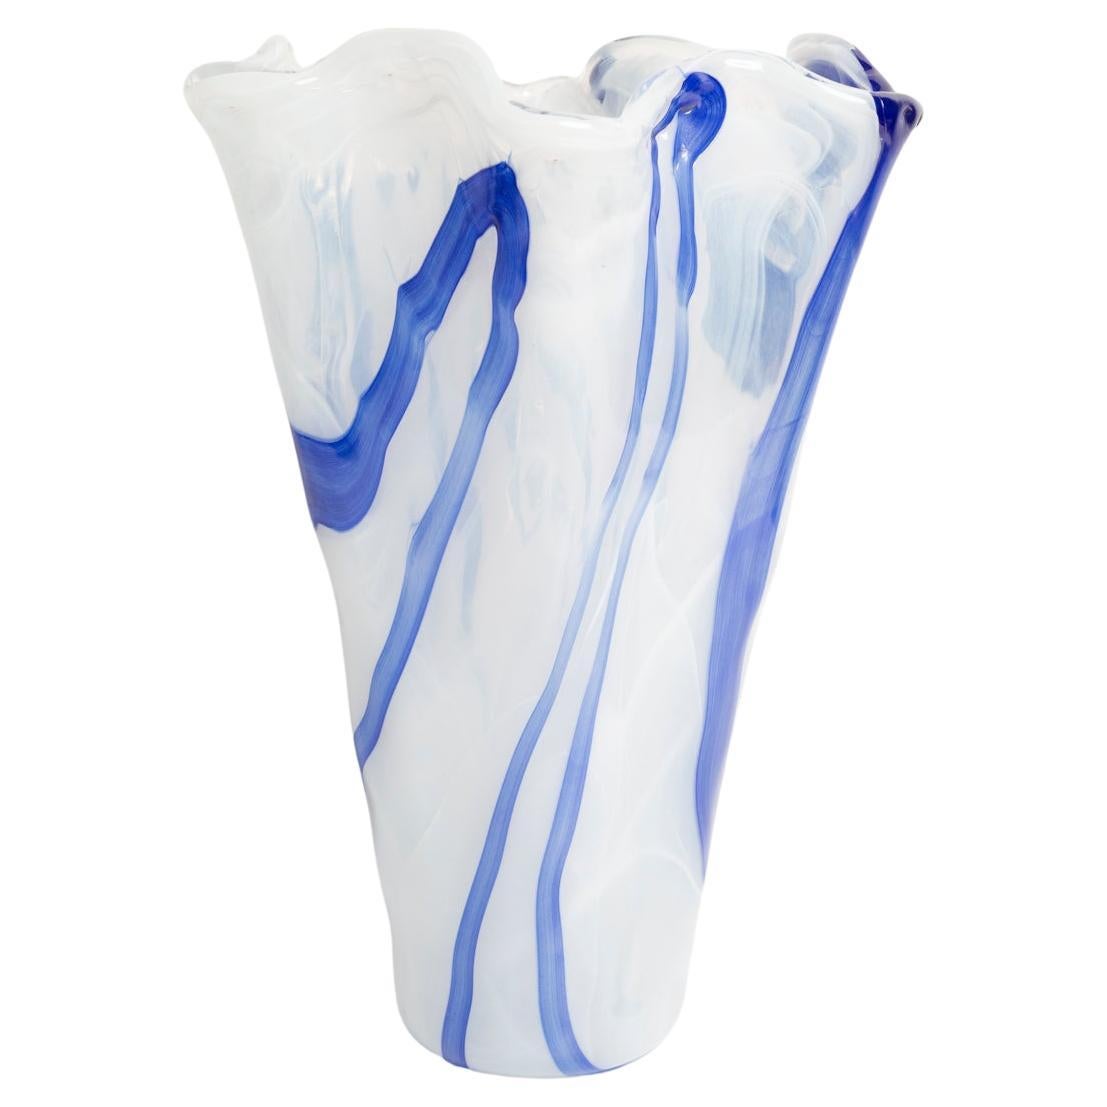 Midcentury Vintage White and Blue Big Murano Glass Vase, Italy, 2000s